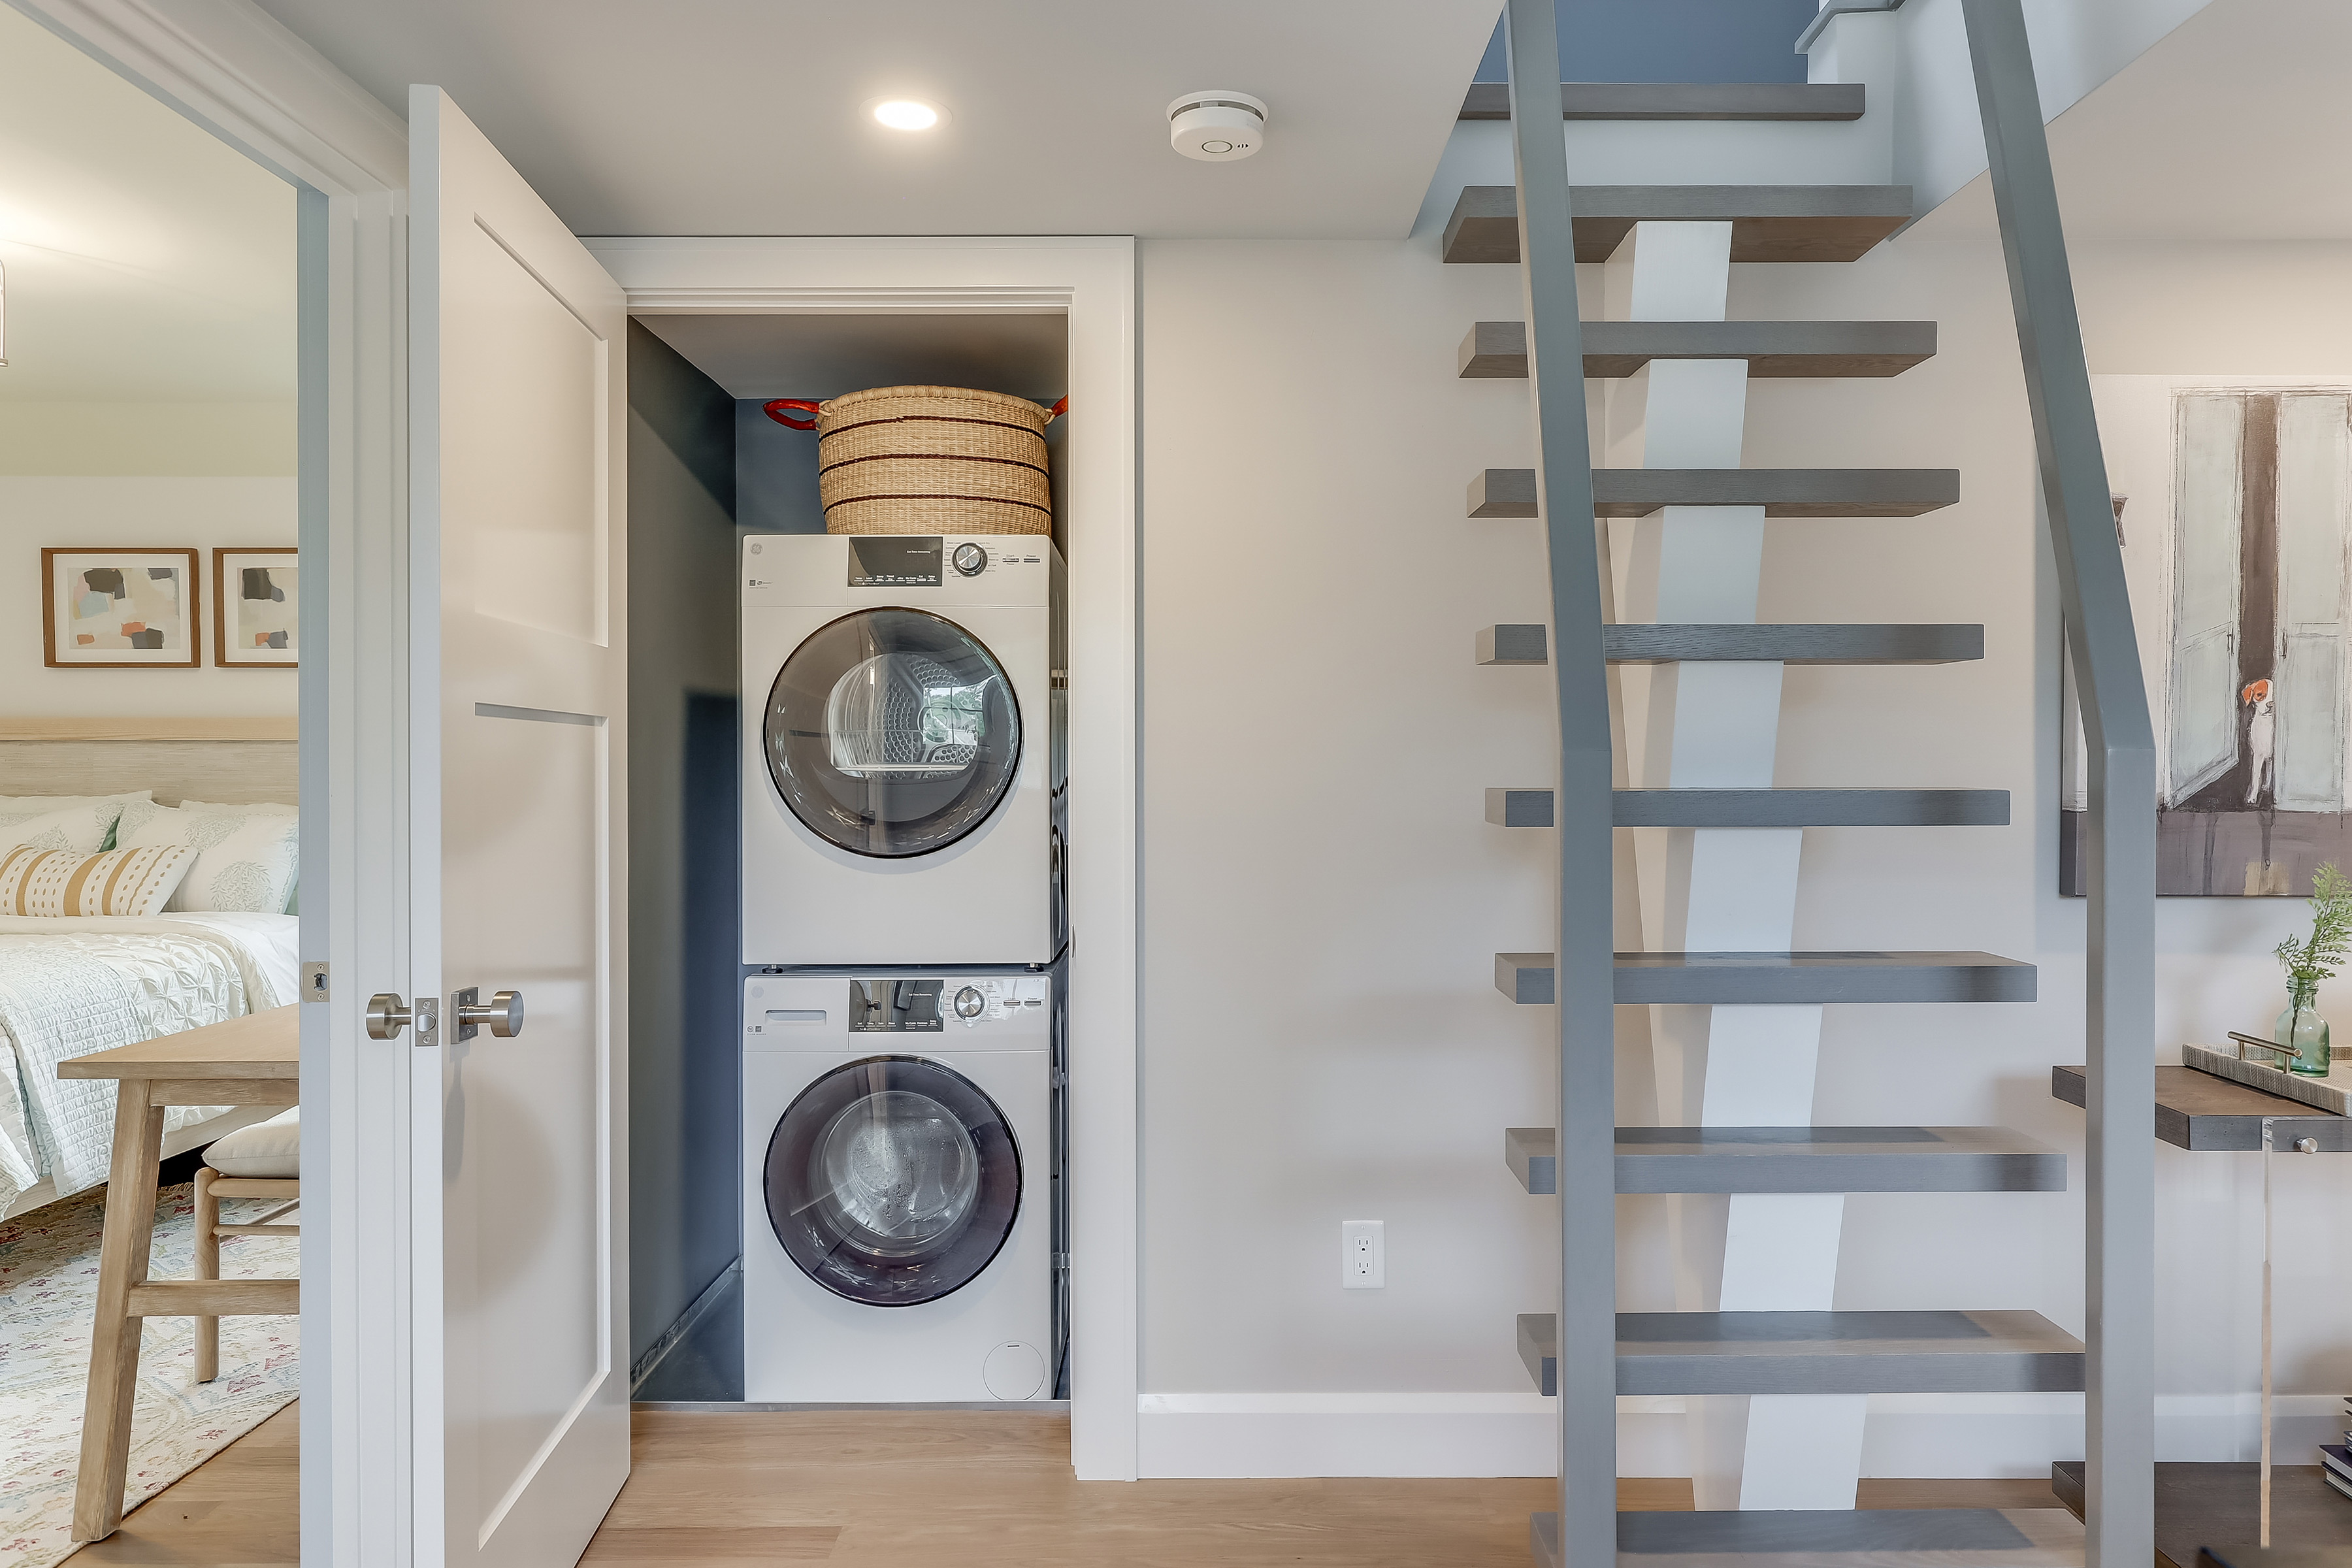 A stacked washer dryer in a closet.